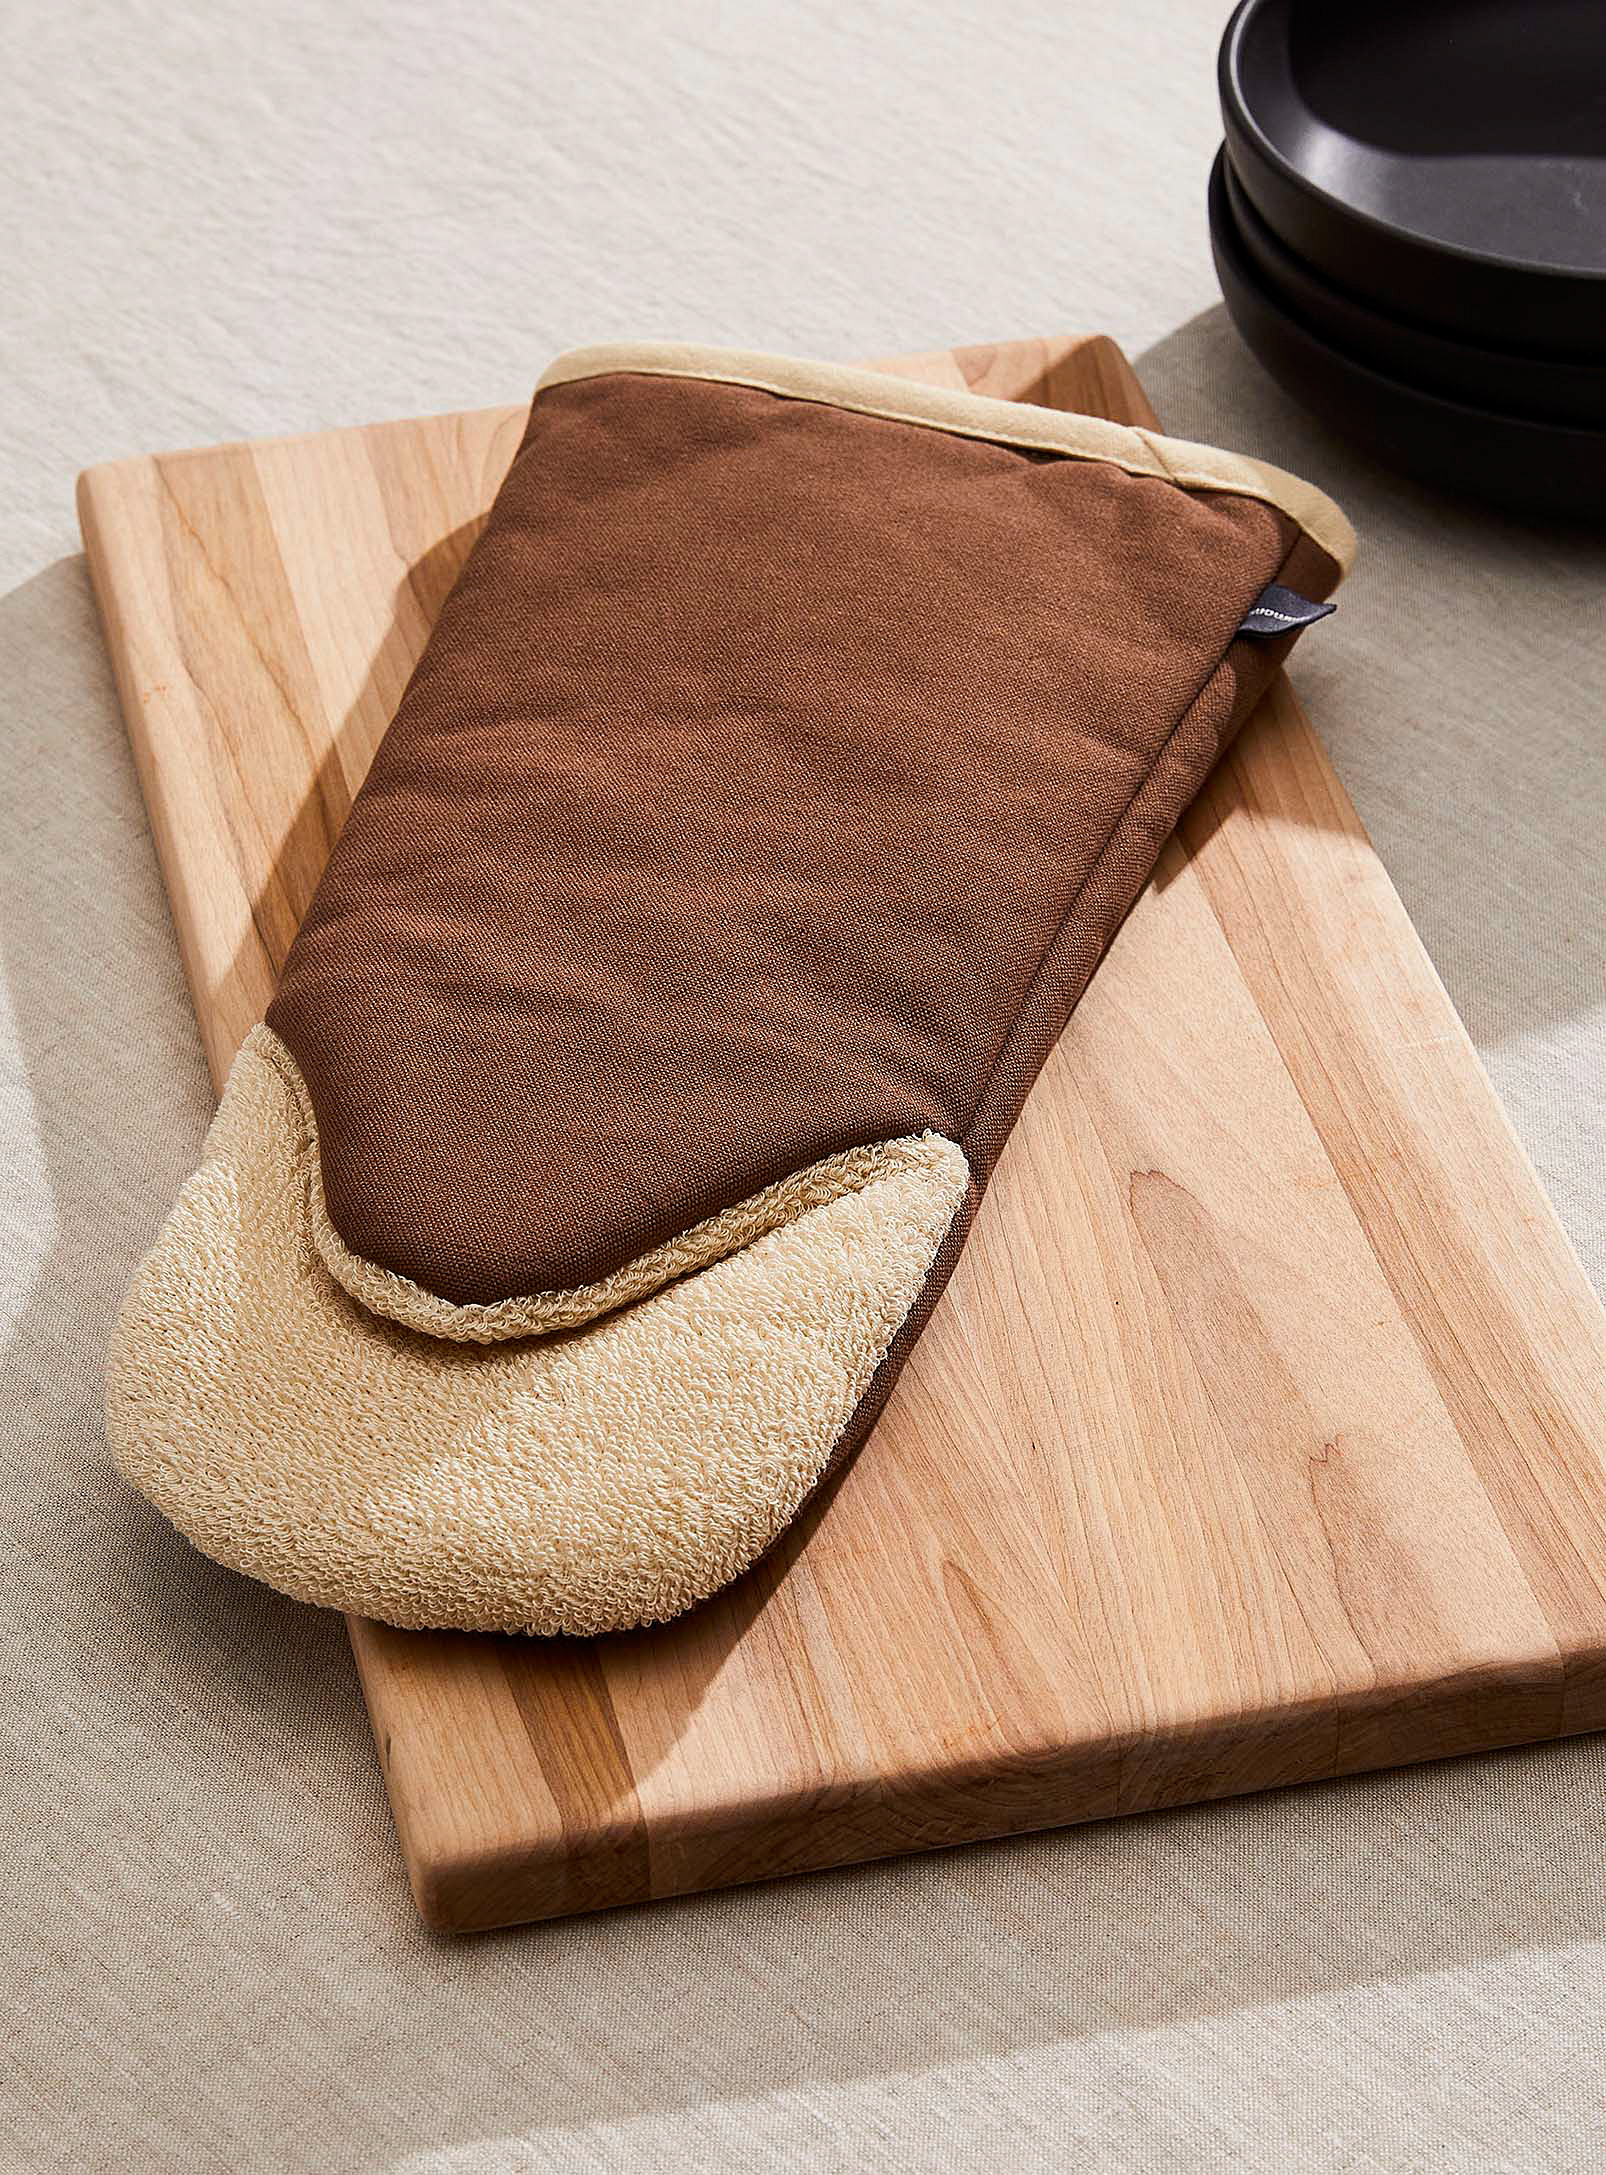 Simons Maison Large Organic Cotton Twill Oven Mitt In Brown